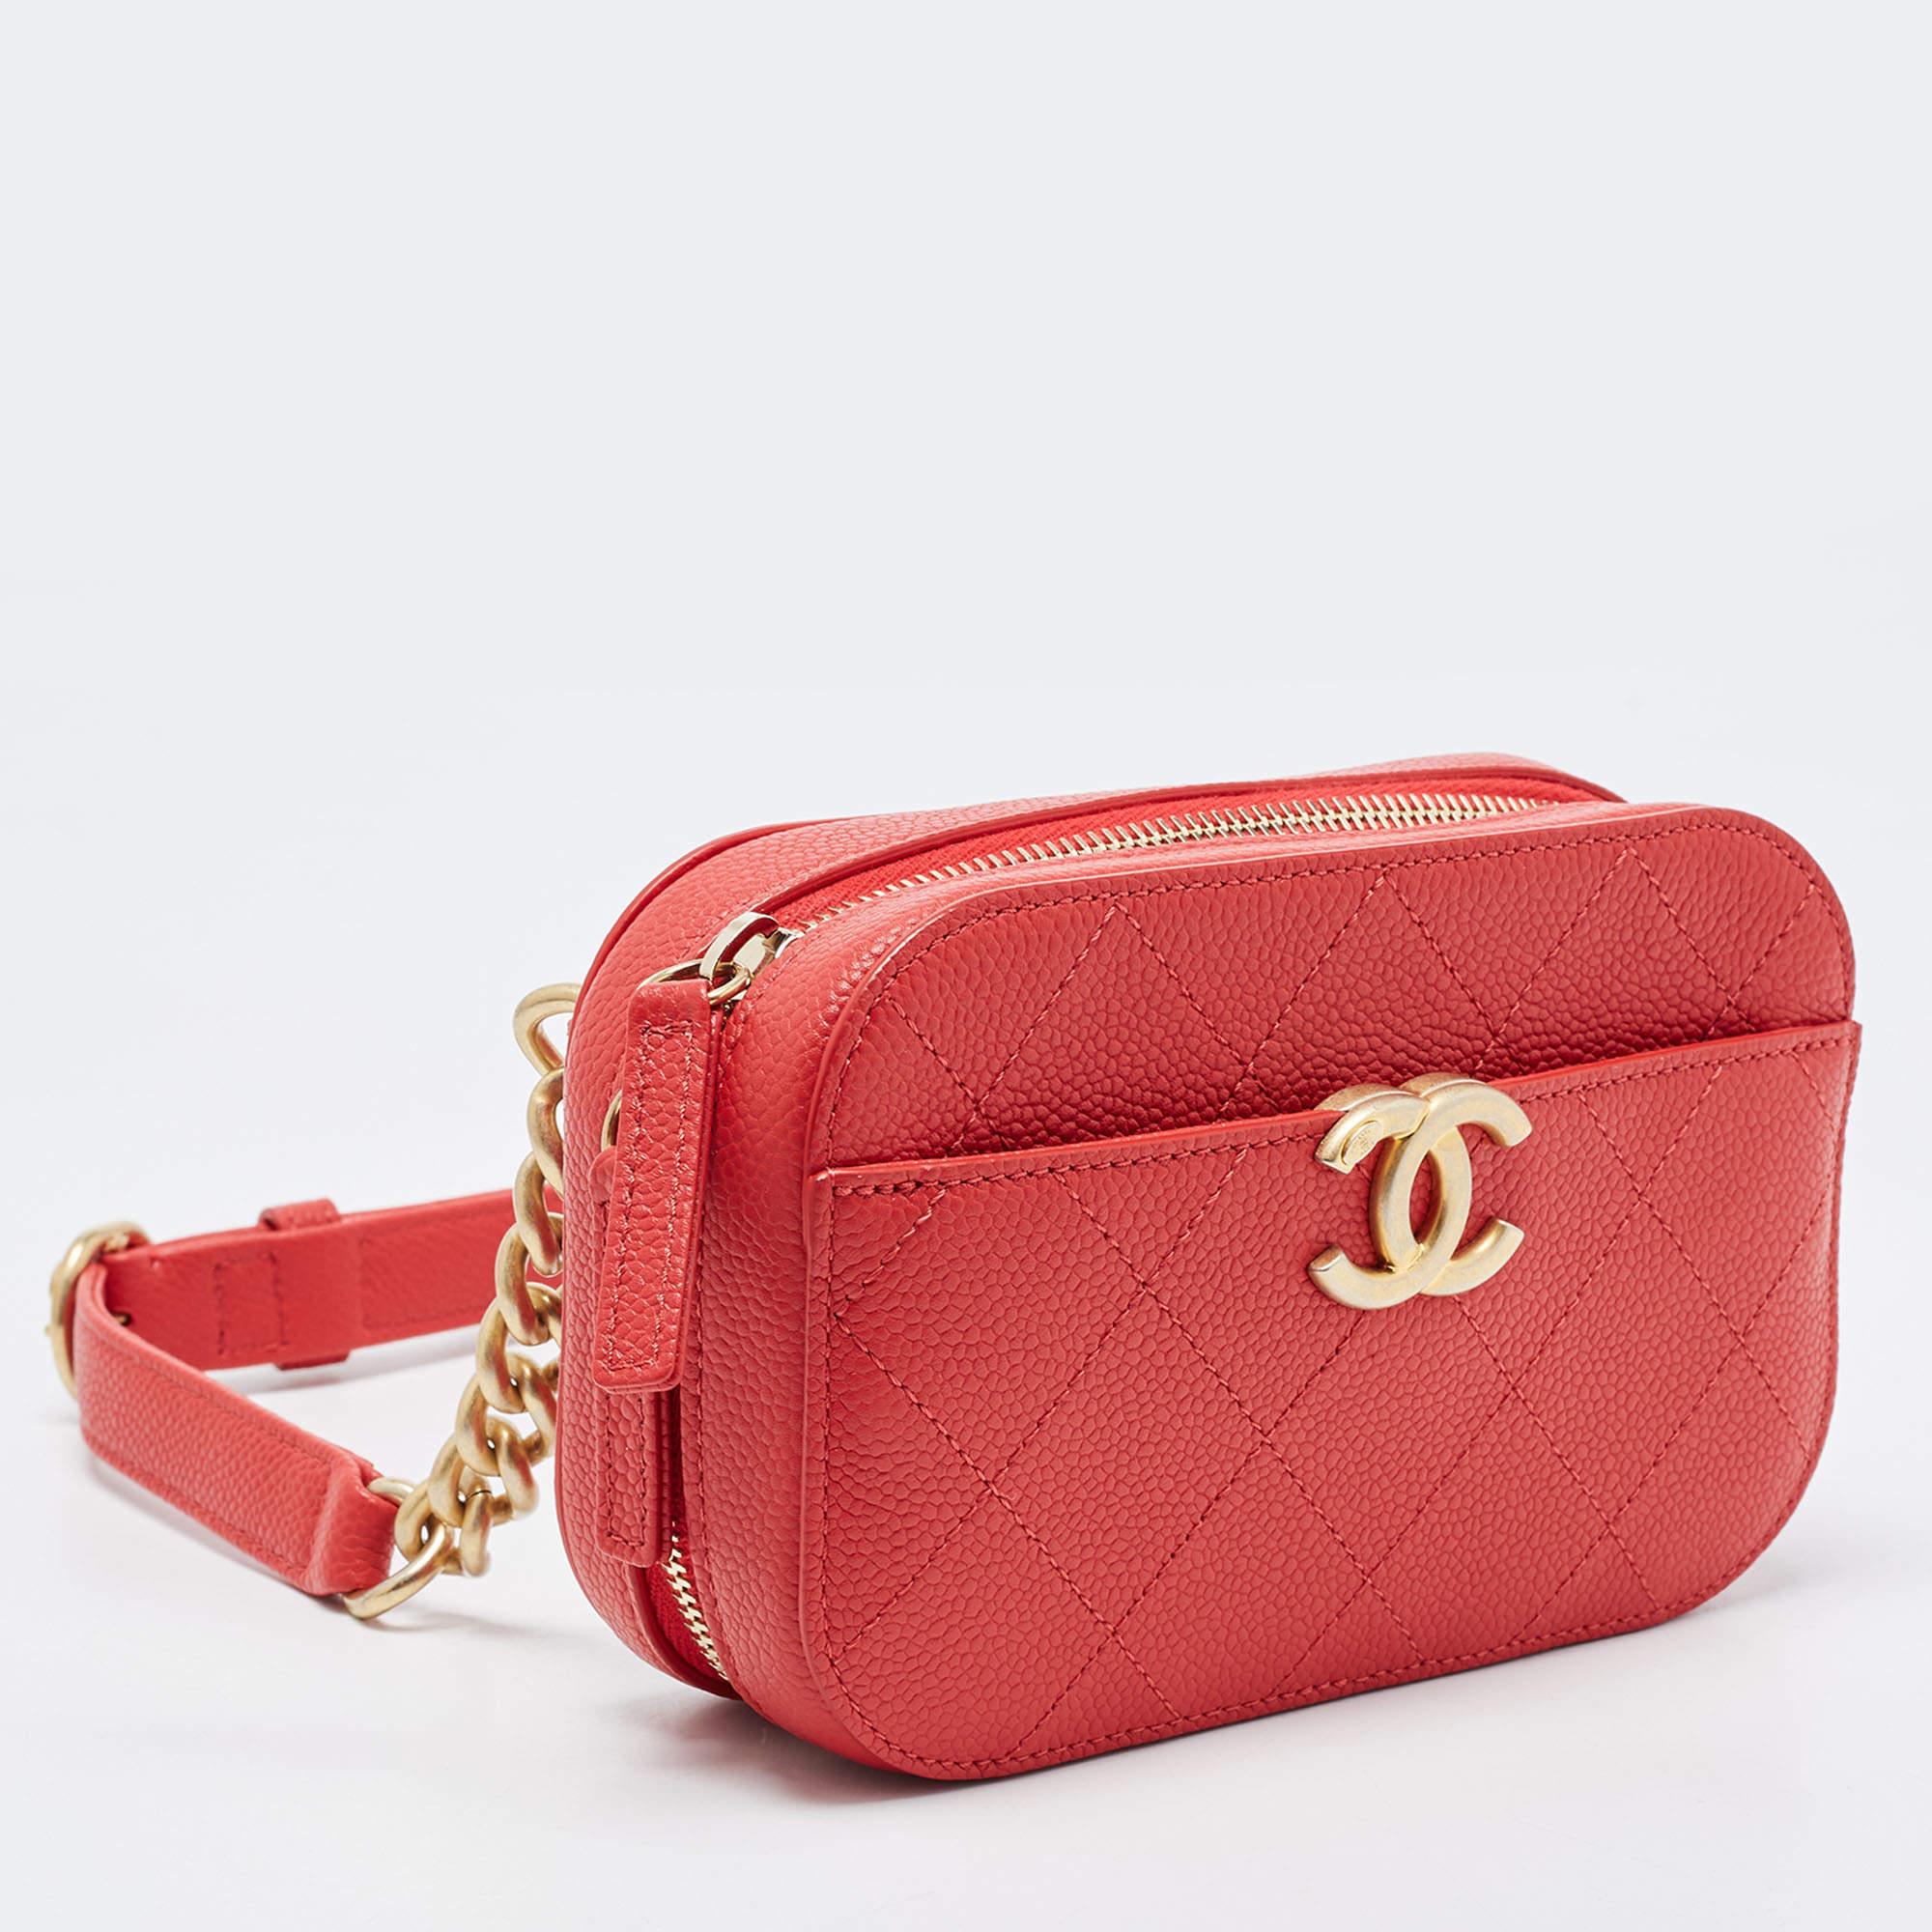 Women's Chanel Red Quilted Caviar Leather Chic Affinity Belt Bag